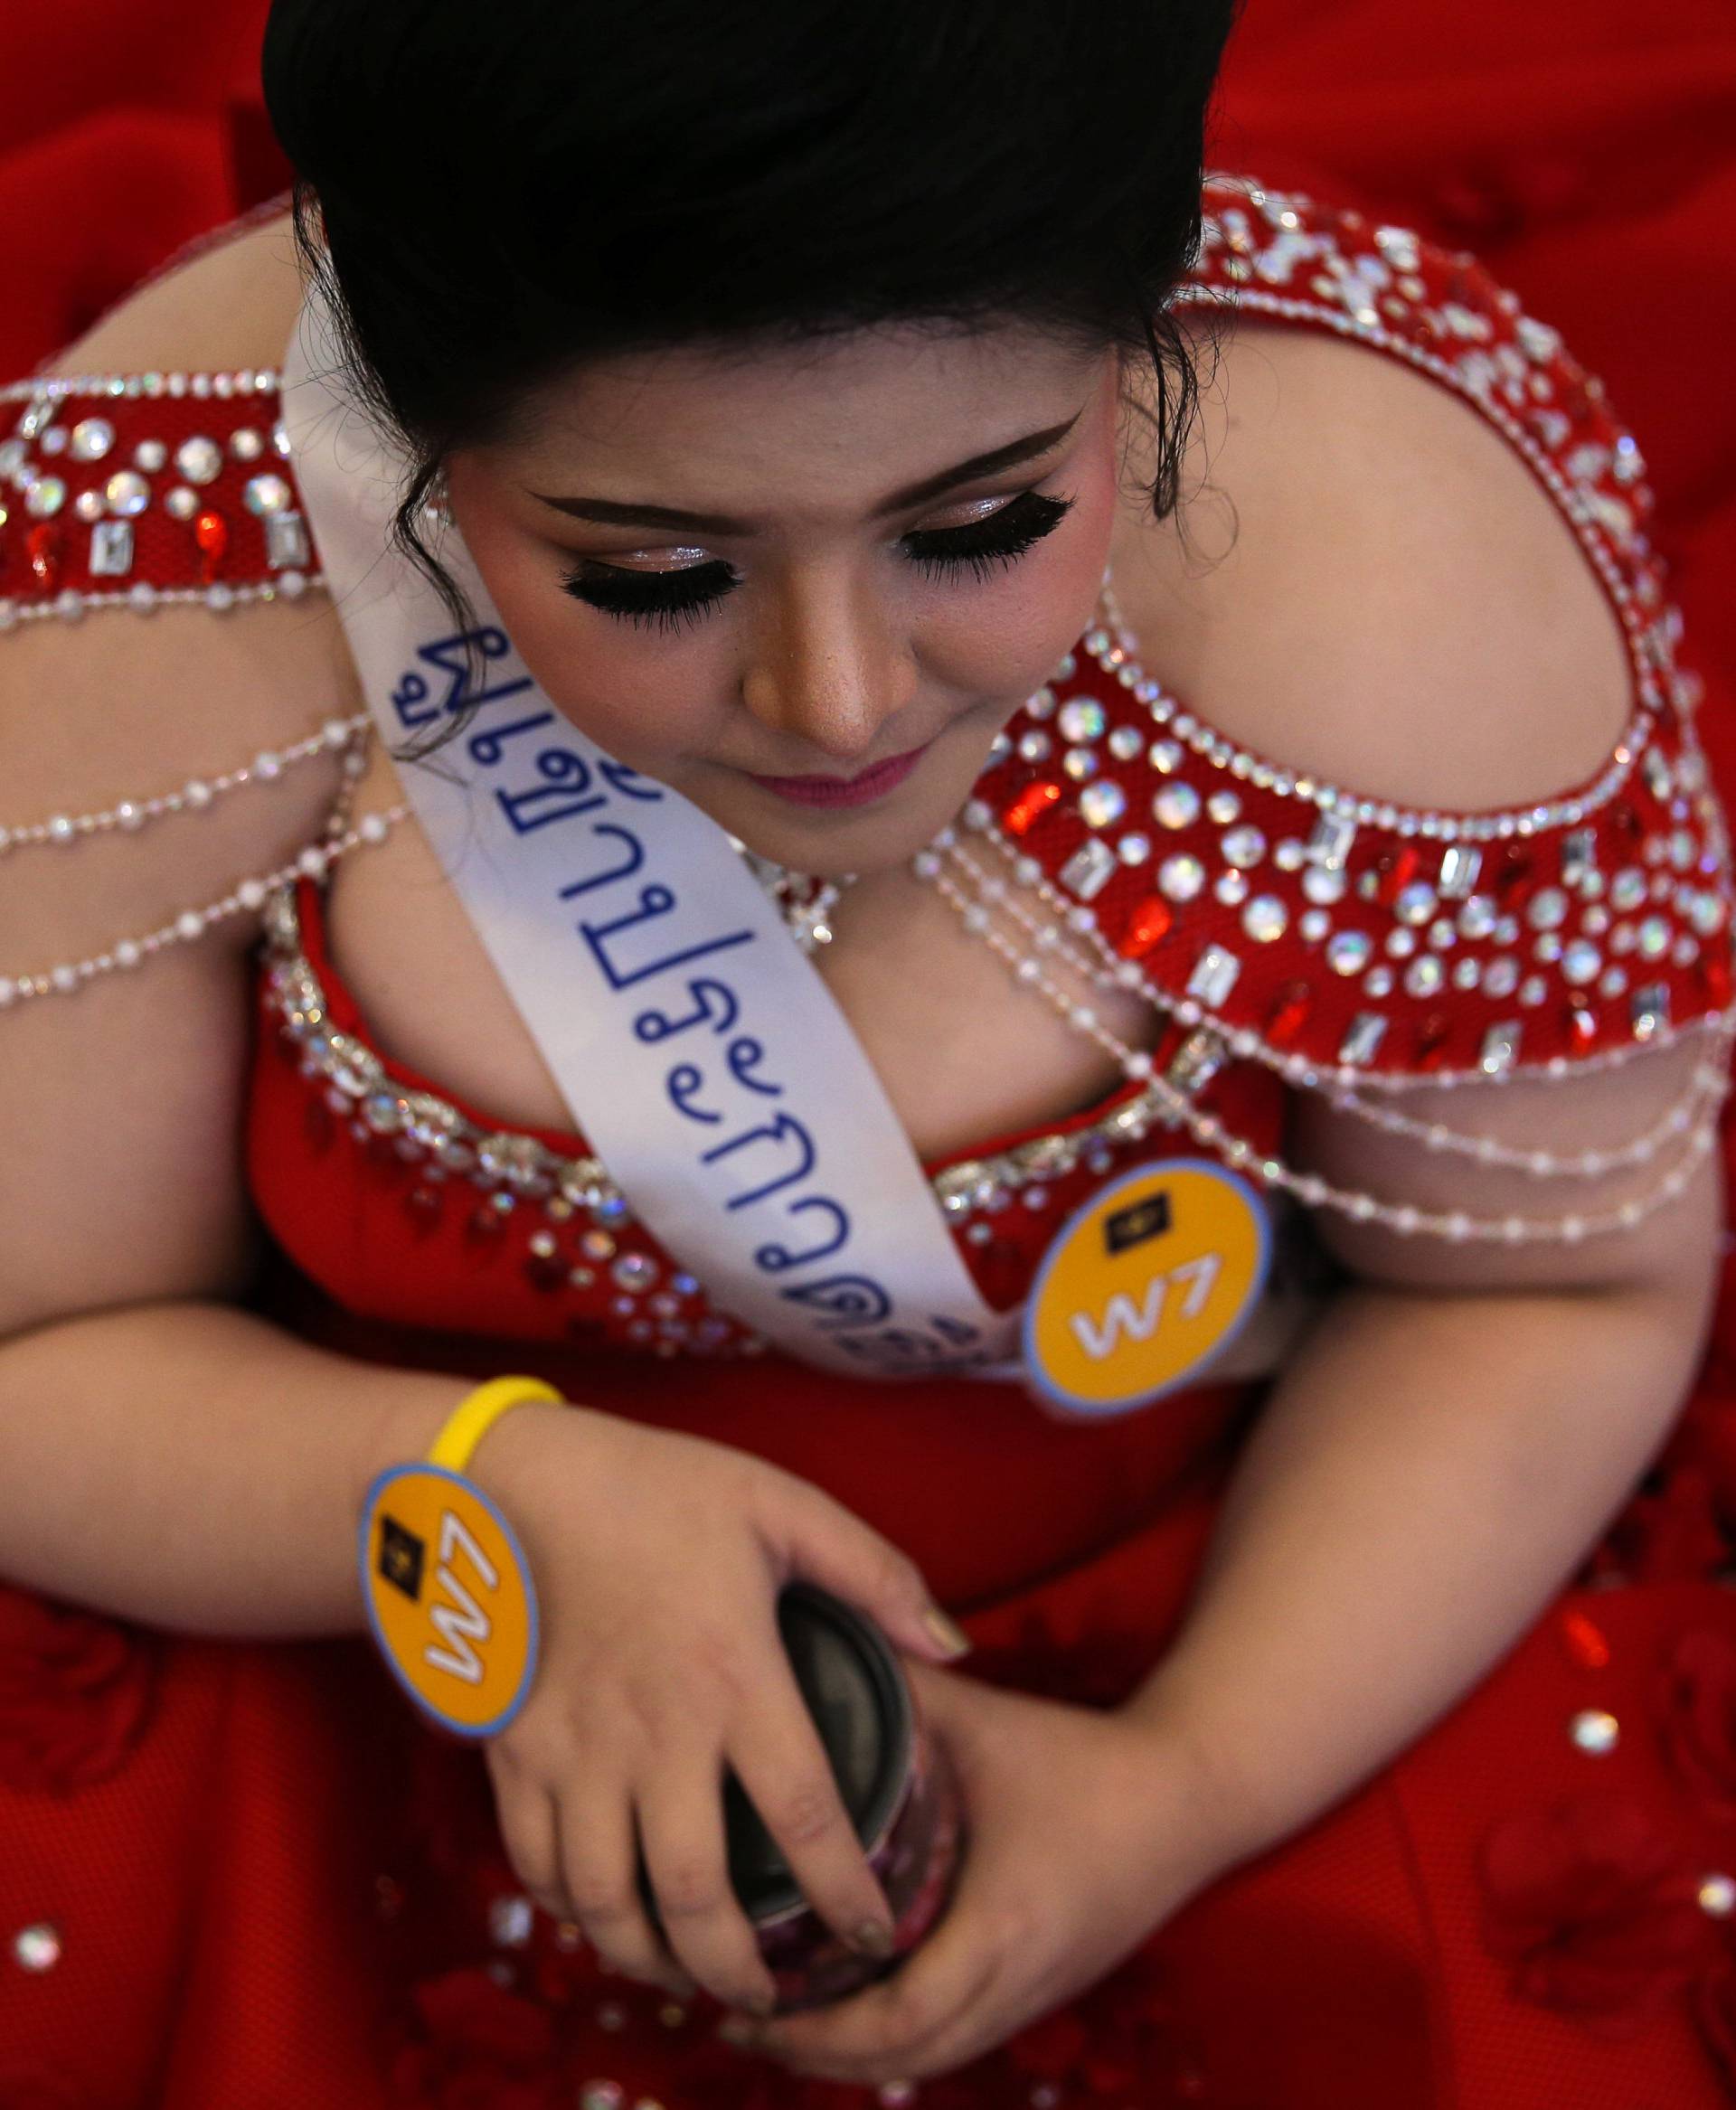 A participant prepares backstage before the final show of the Miss Jumbo 2018 at a department store in Nakhon Ratchasima